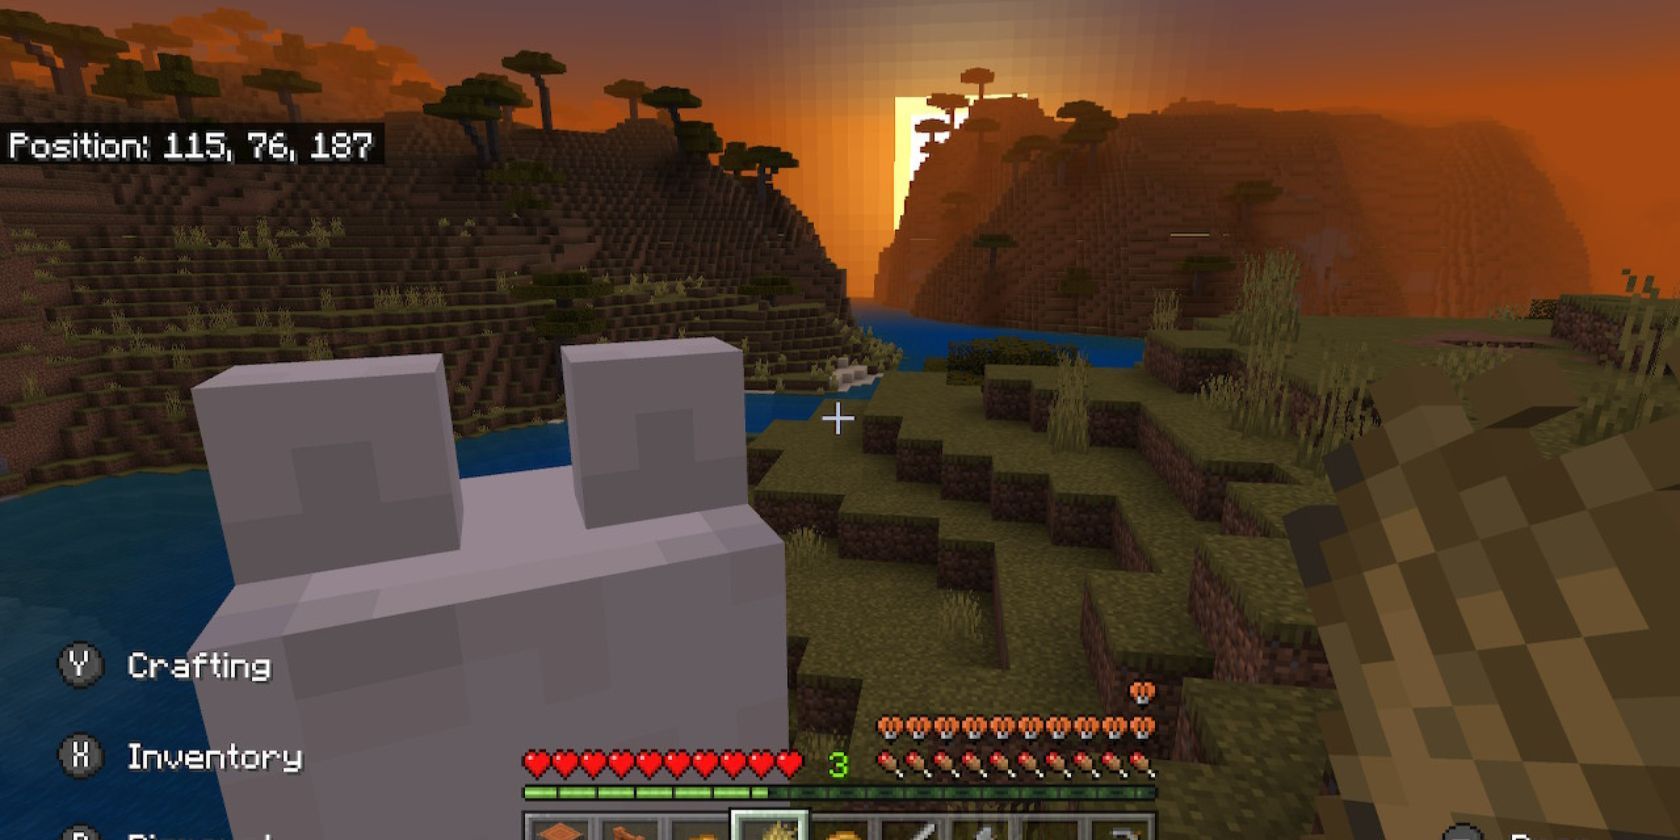 Bedrock Syncs Minecraft worlds to Google Drive on your Android devices